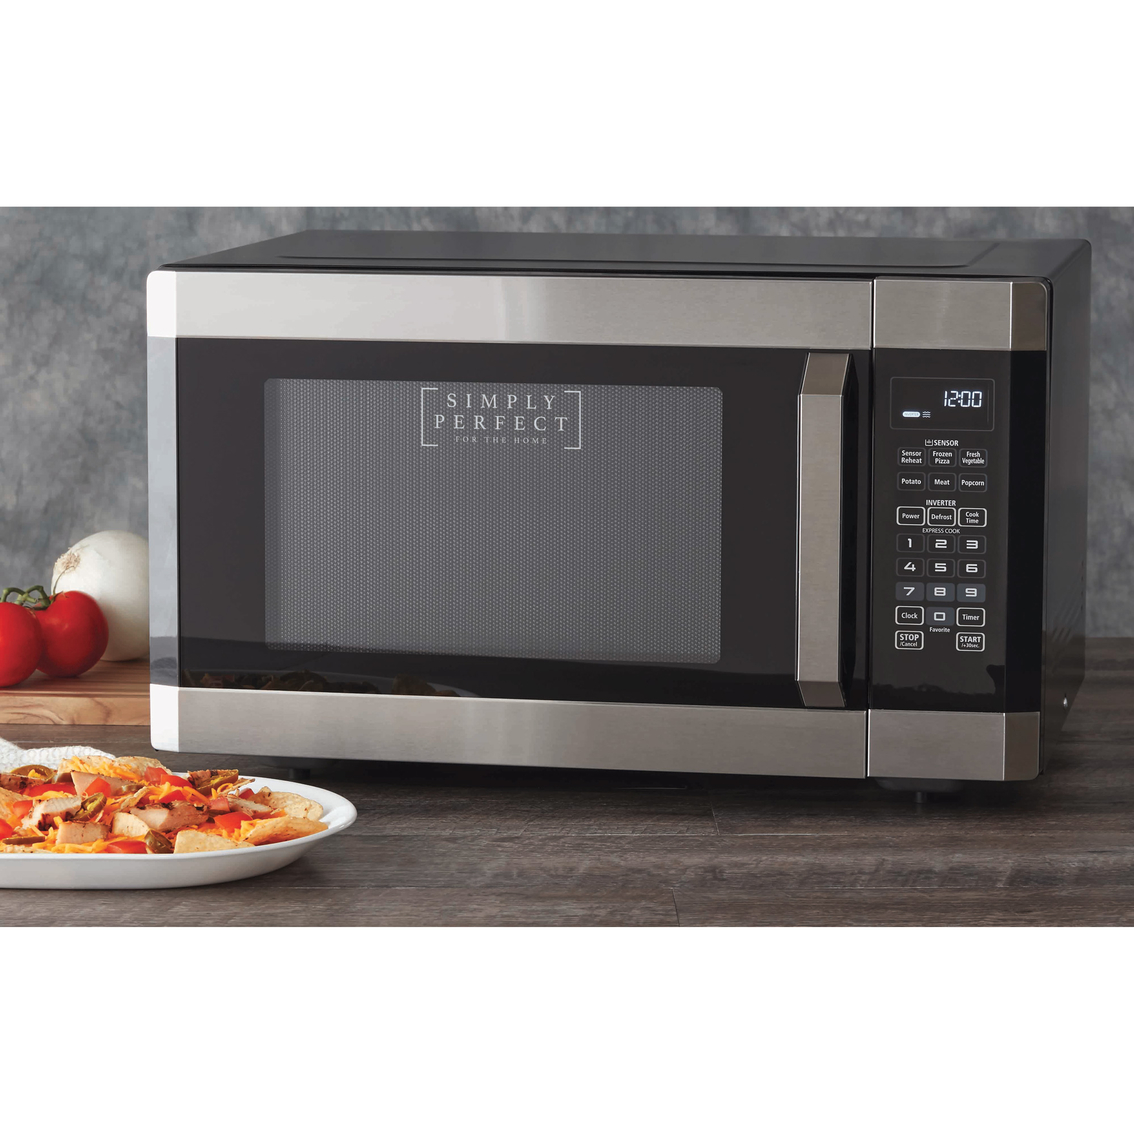 Simply Perfect 1.6cf Microwave Oven w/Inverter function Stainless steel - Image 2 of 2